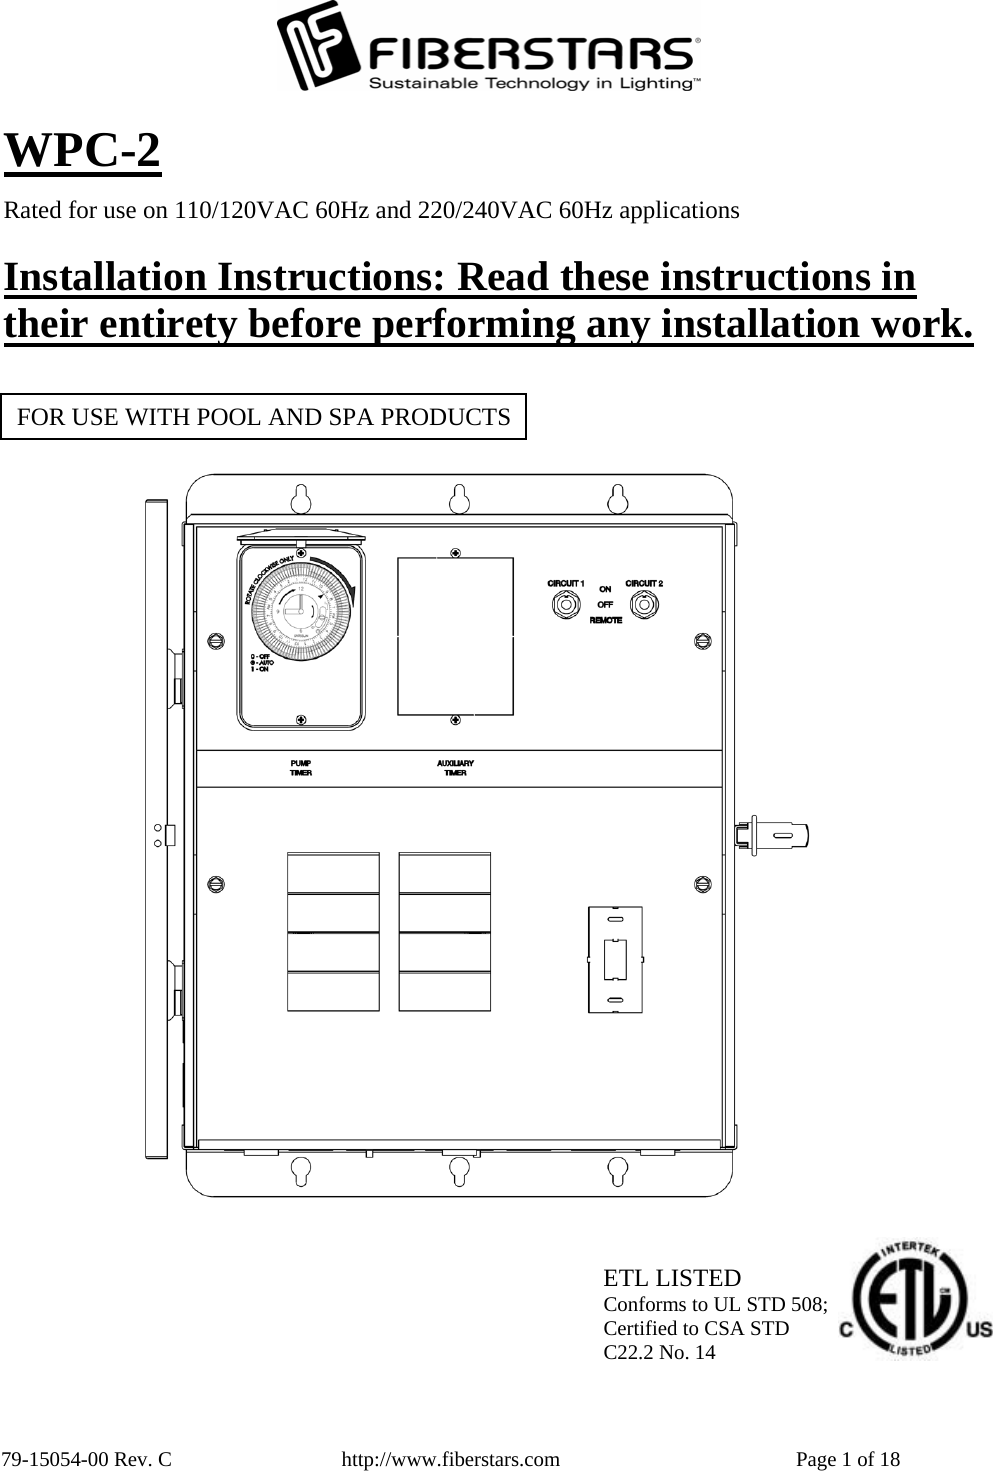  79-15054-00 Rev. C  http://www.fiberstars.com  Page 1 of 18 Installation Instructions: Read these instructions in their entirety before performing any installation work.Rated for use on 110/120VAC 60Hz and 220/240VAC 60Hz applications WPC-2 ETL LISTED Conforms to UL STD 508; Certified to CSA STD C22.2 No. 14  FOR USE WITH POOL AND SPA PRODUCTS 